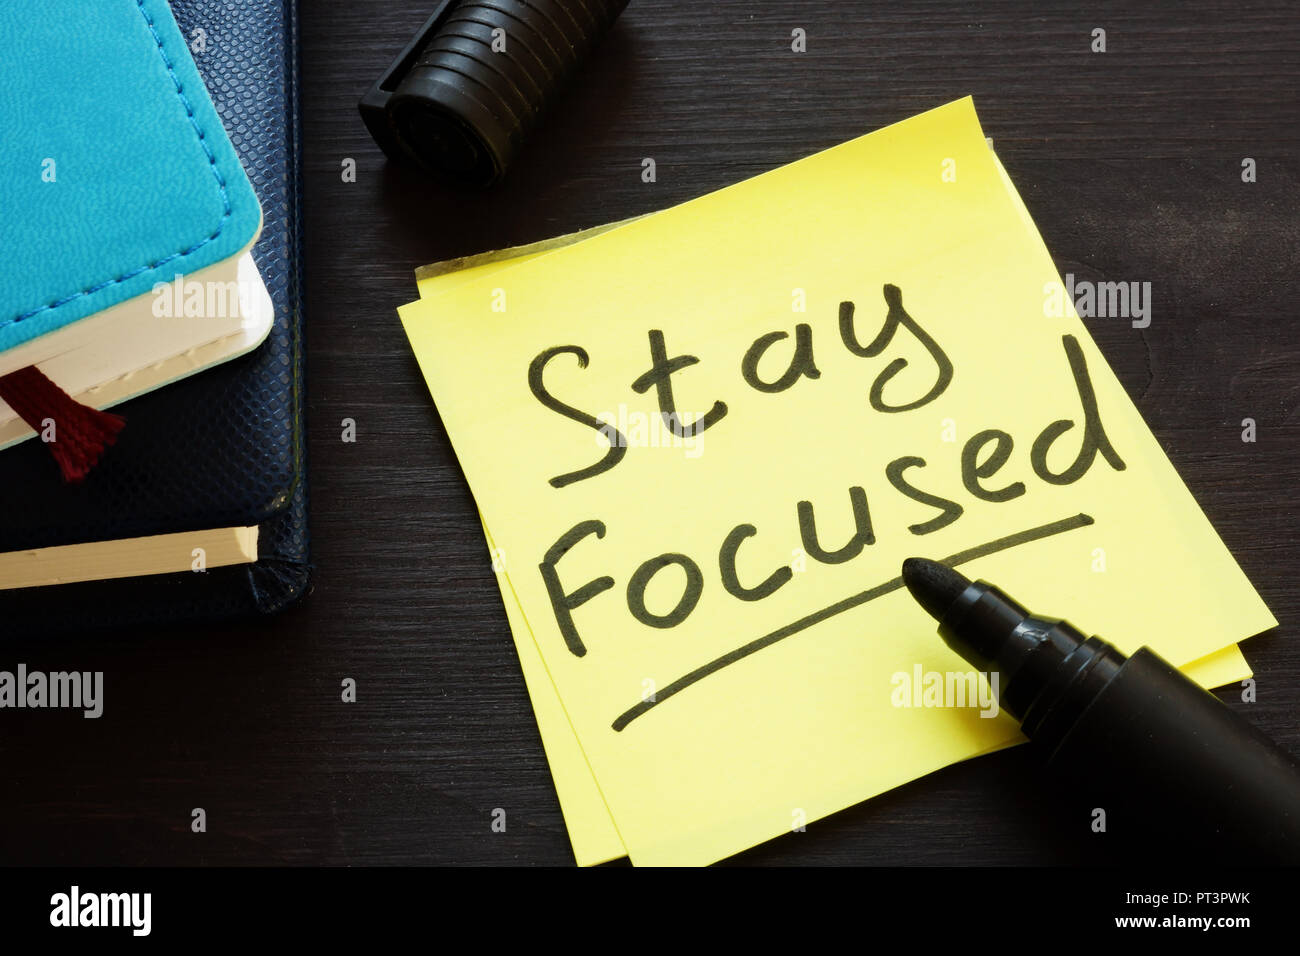 Stay focused handwritten on a memo stick and notepad. Stock Photo